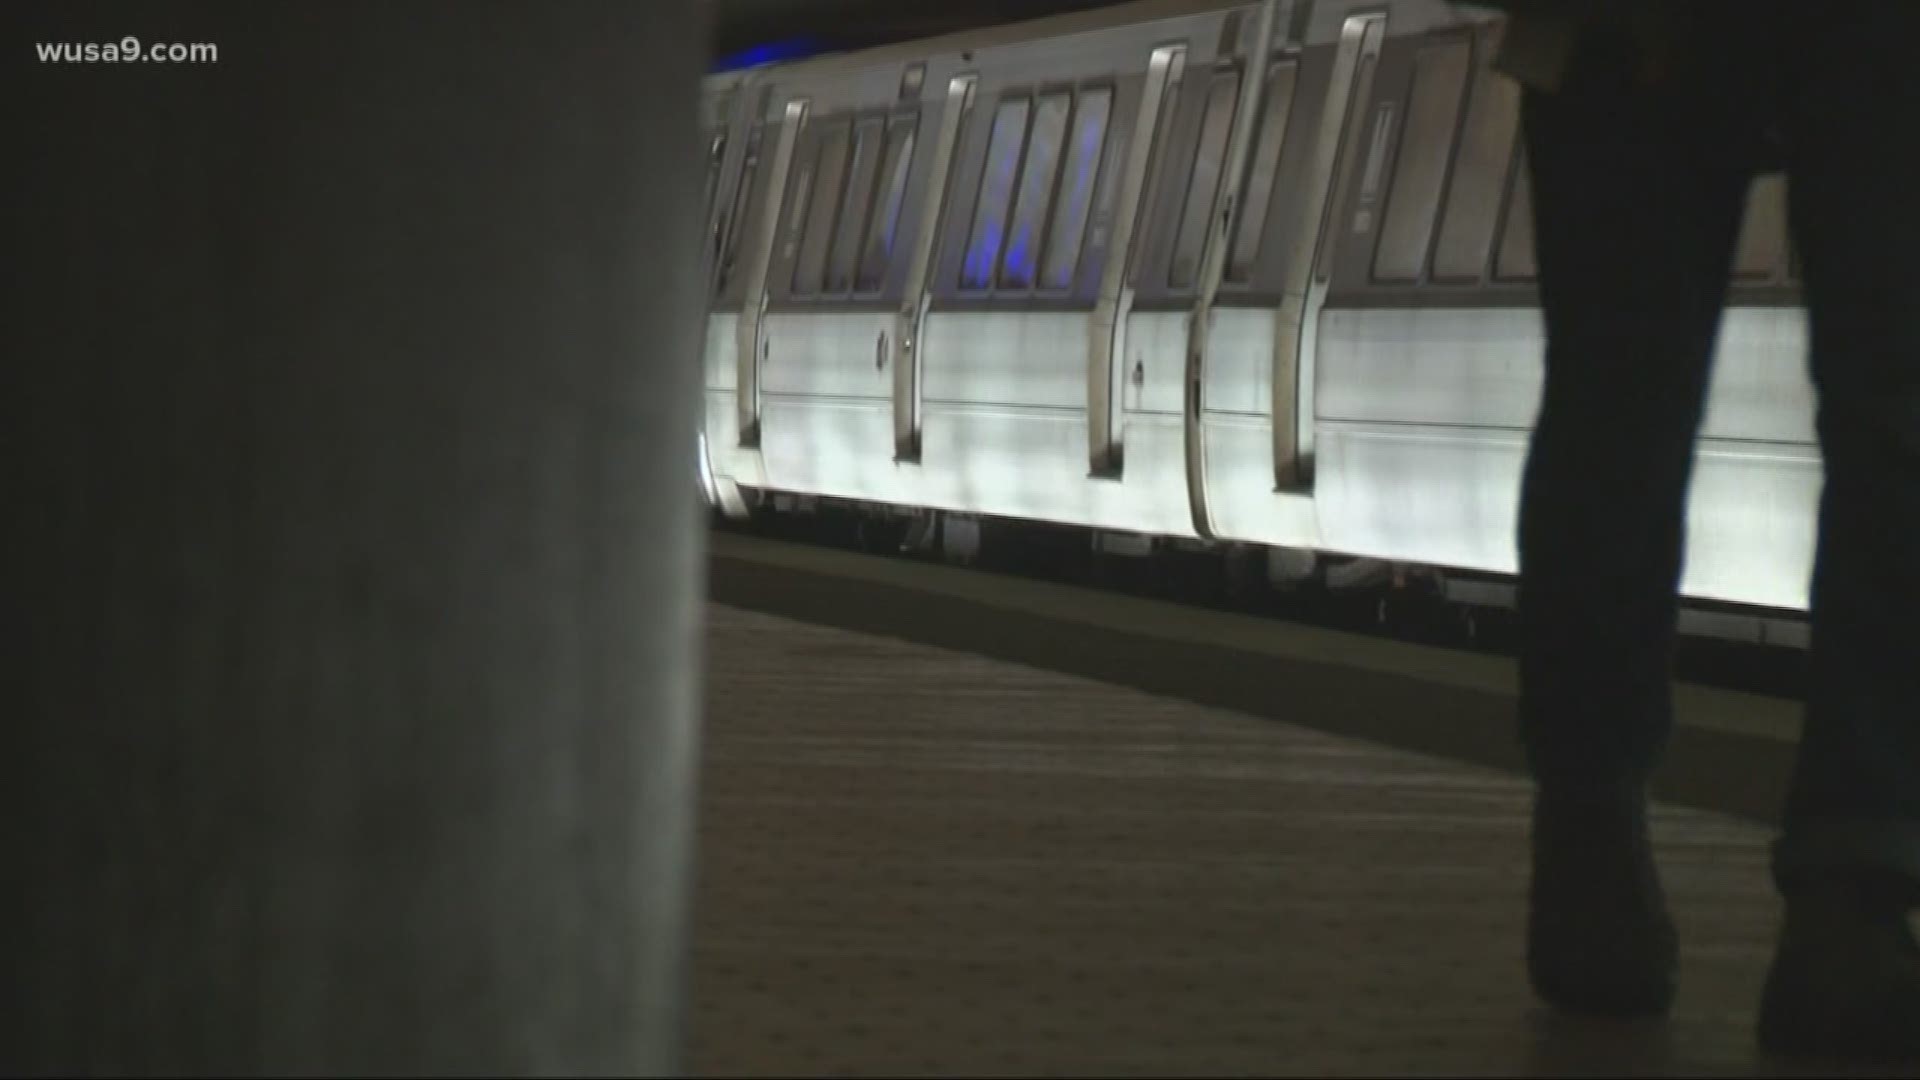 Mayor and DC Council Chairman say that Metro must prioritize restoring late-night service. They say it hurts low-income riders and those working late shifts.